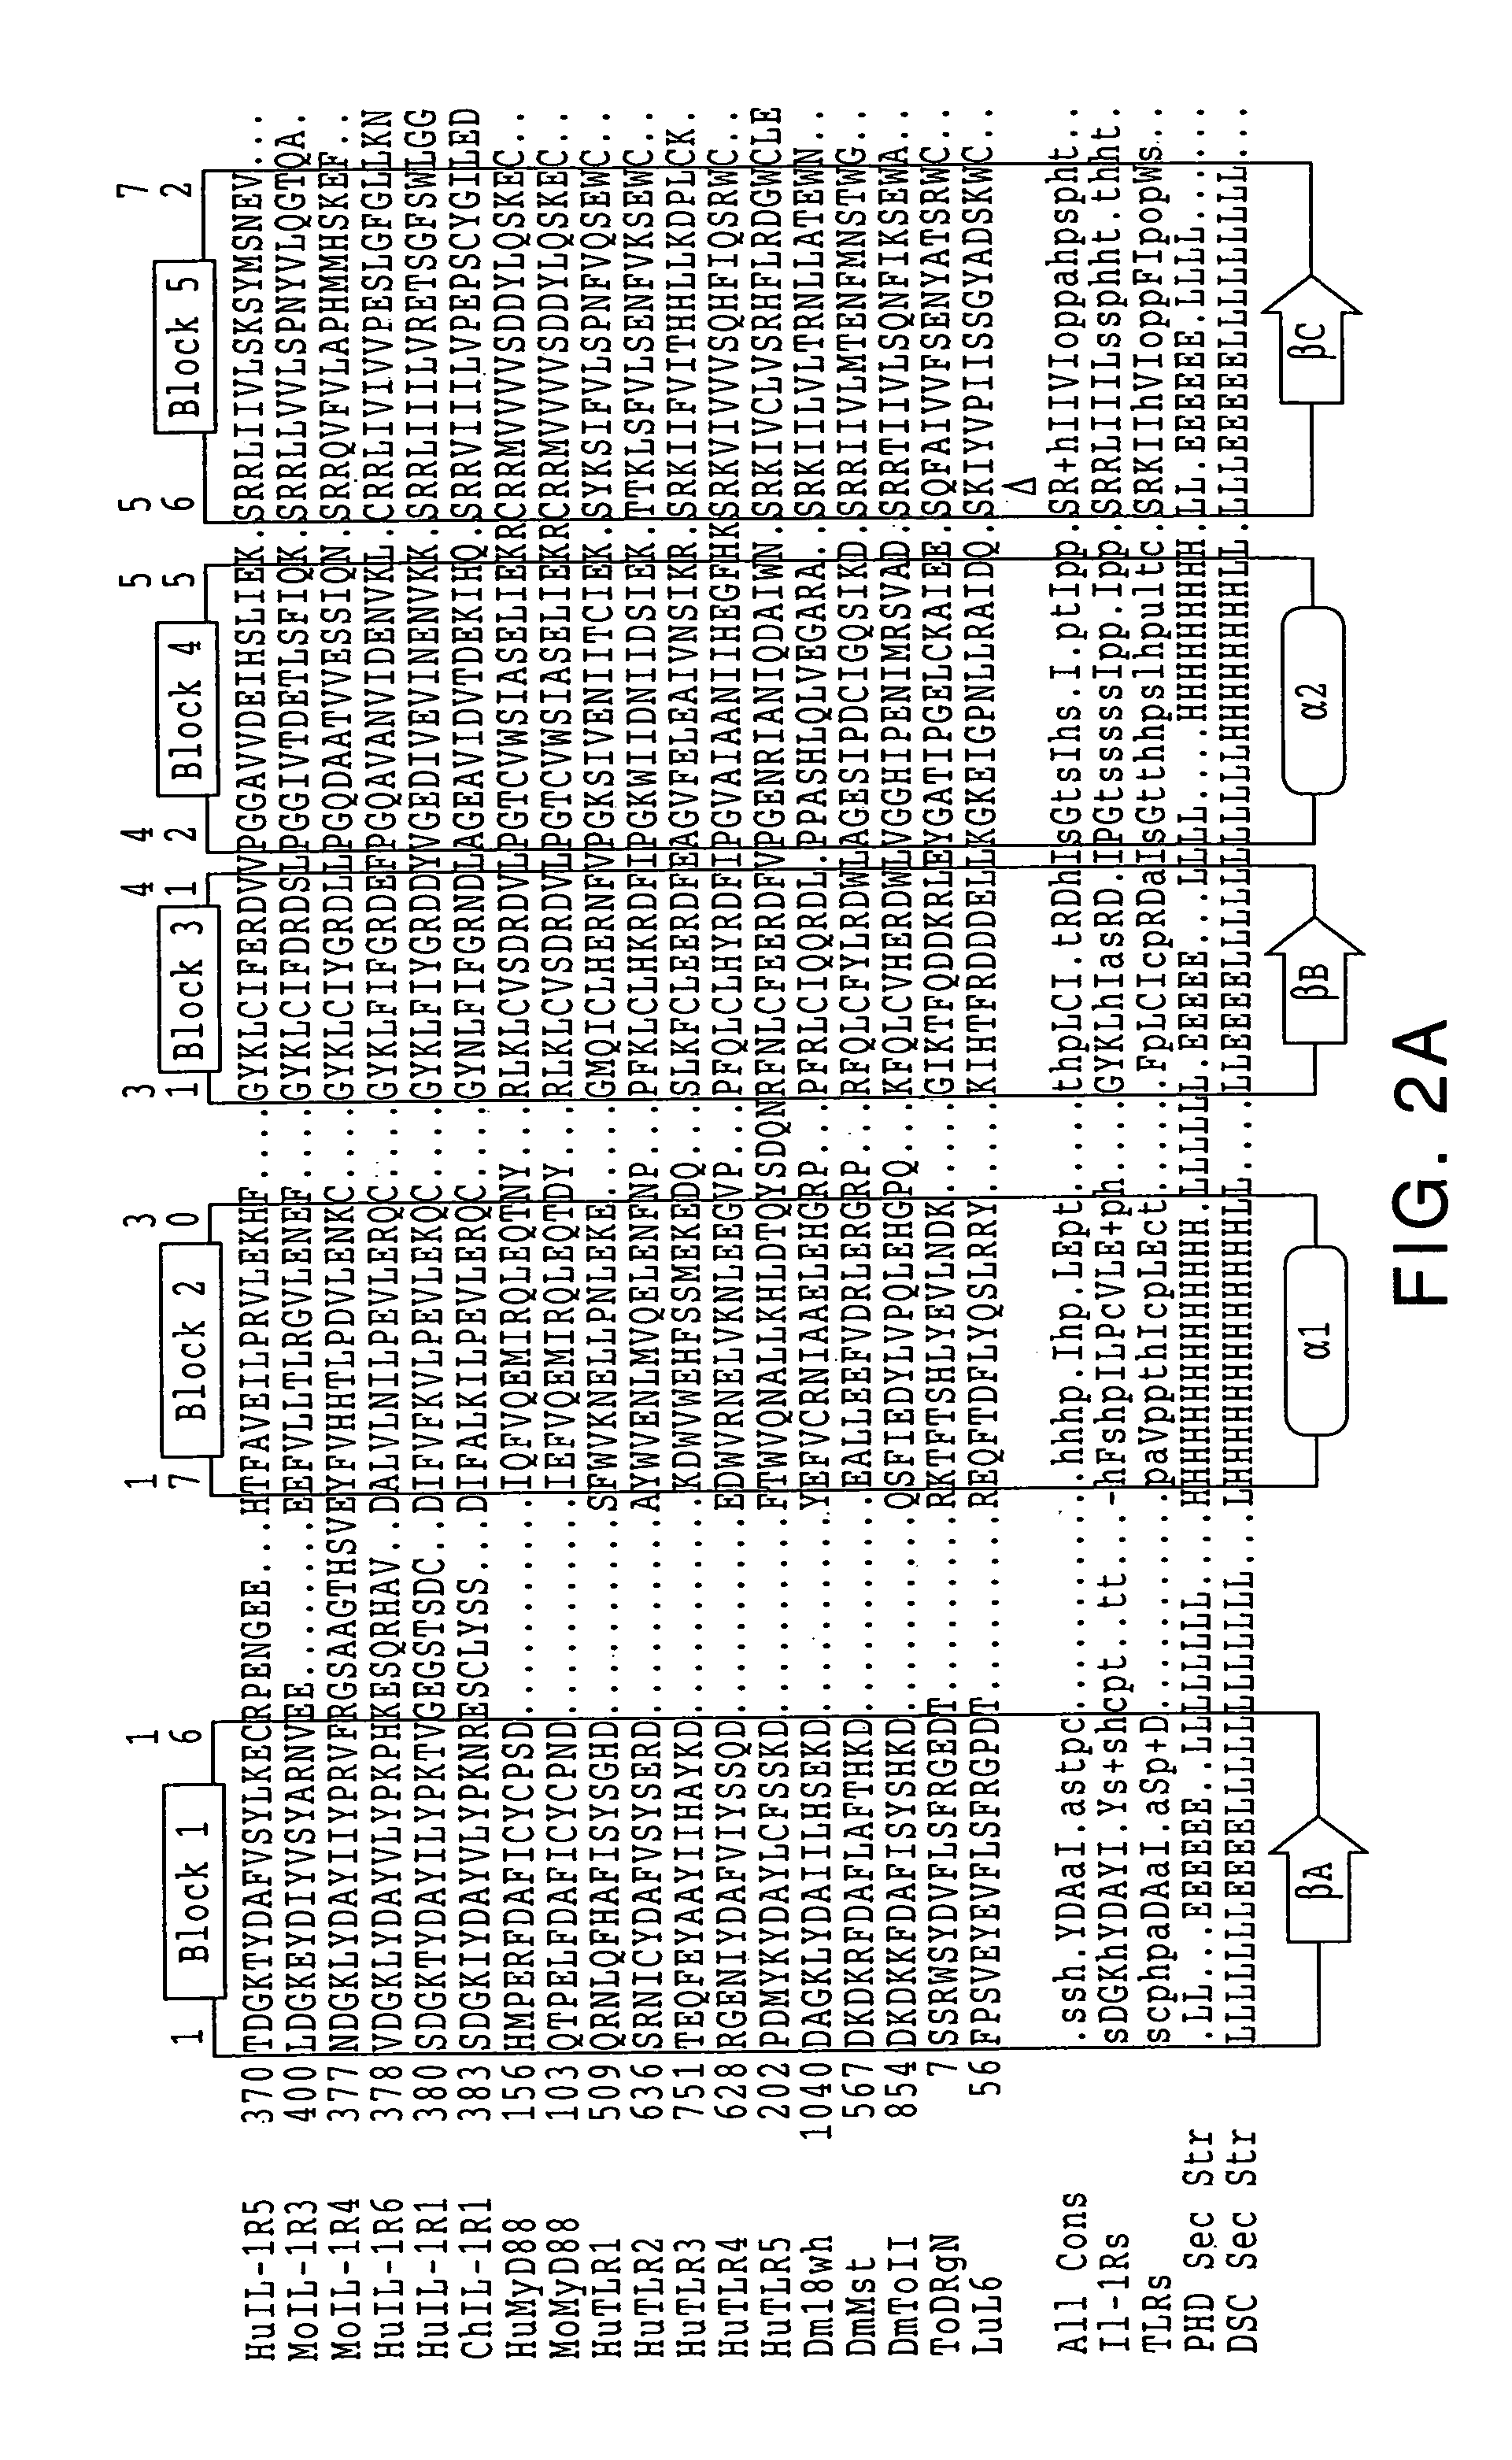 Human receptor proteins; related reagents and methods